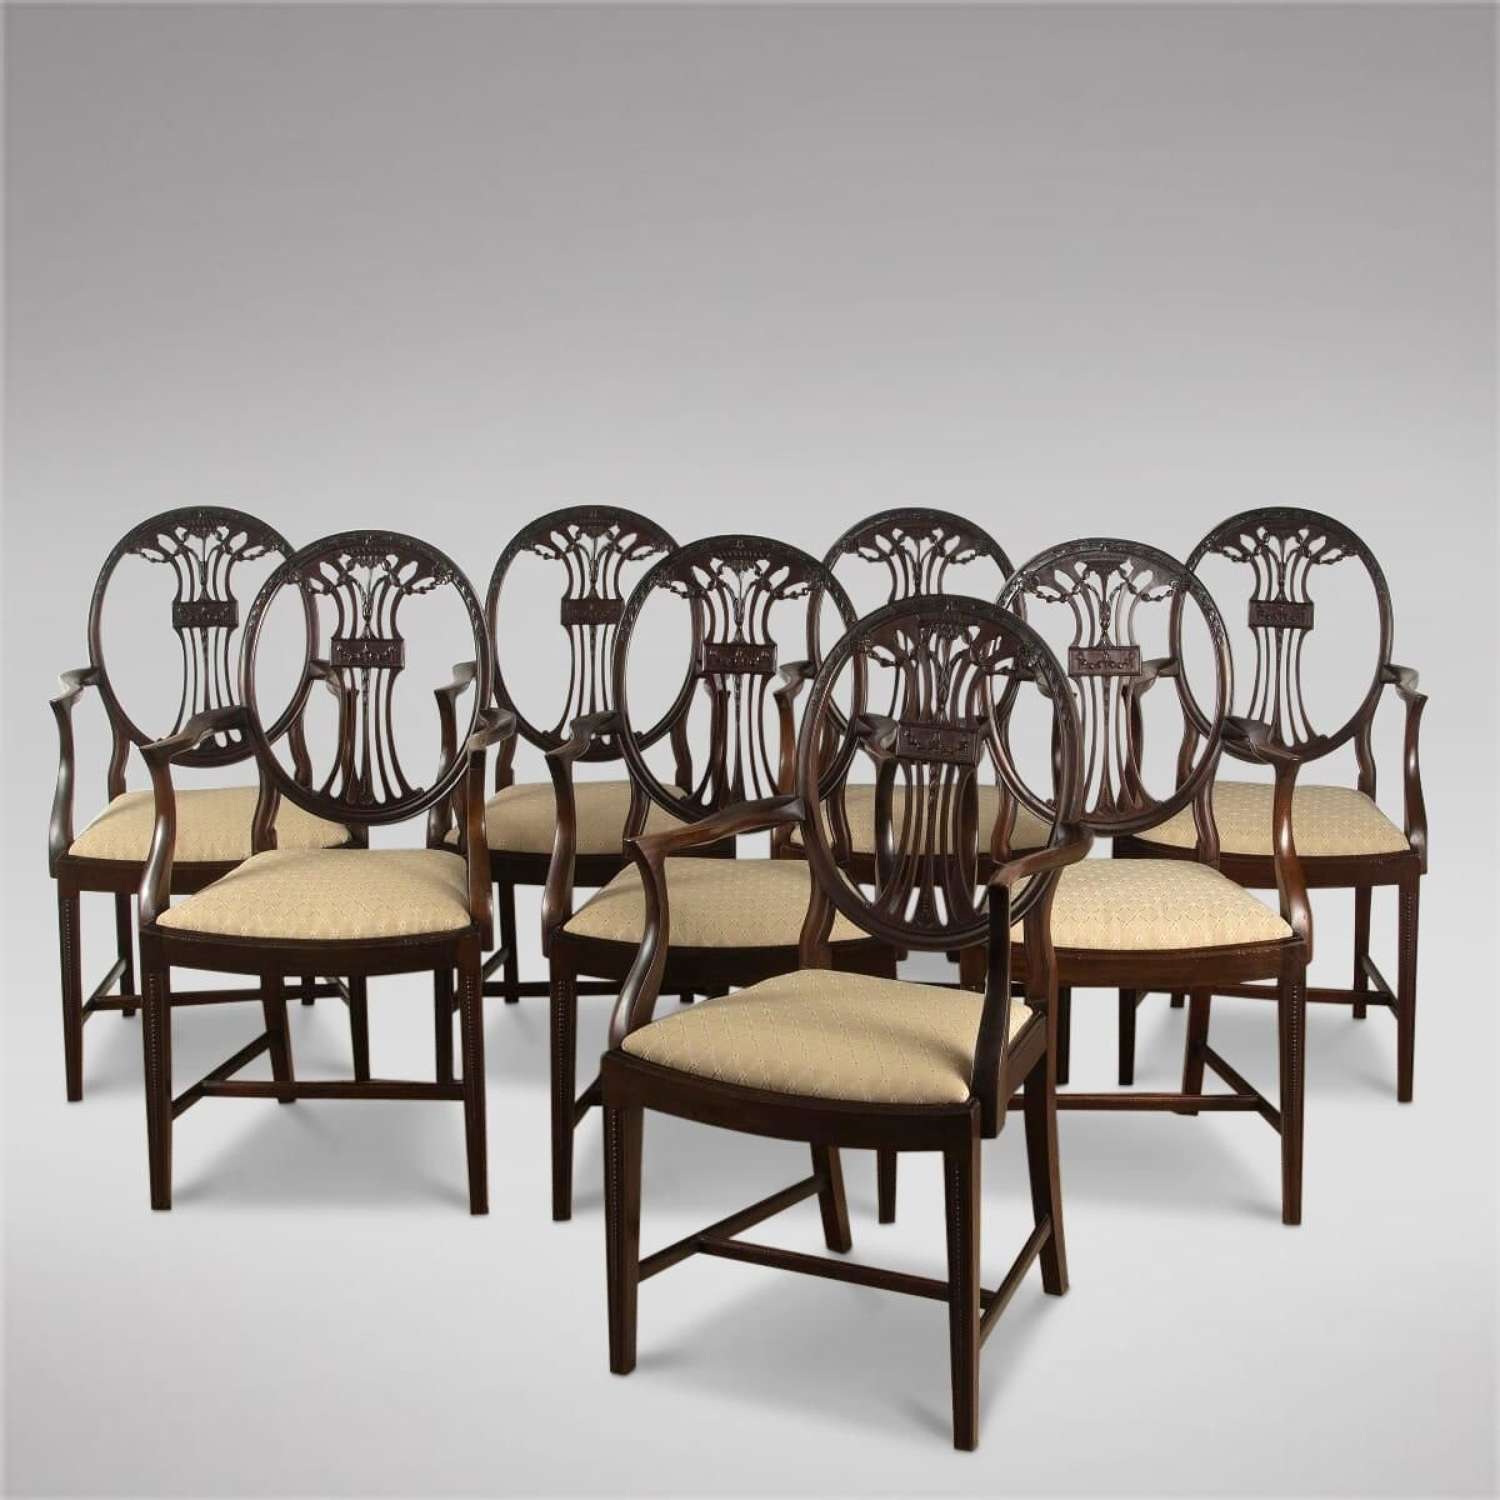 Set of Eight Mahogany Dining Chairs c.1900